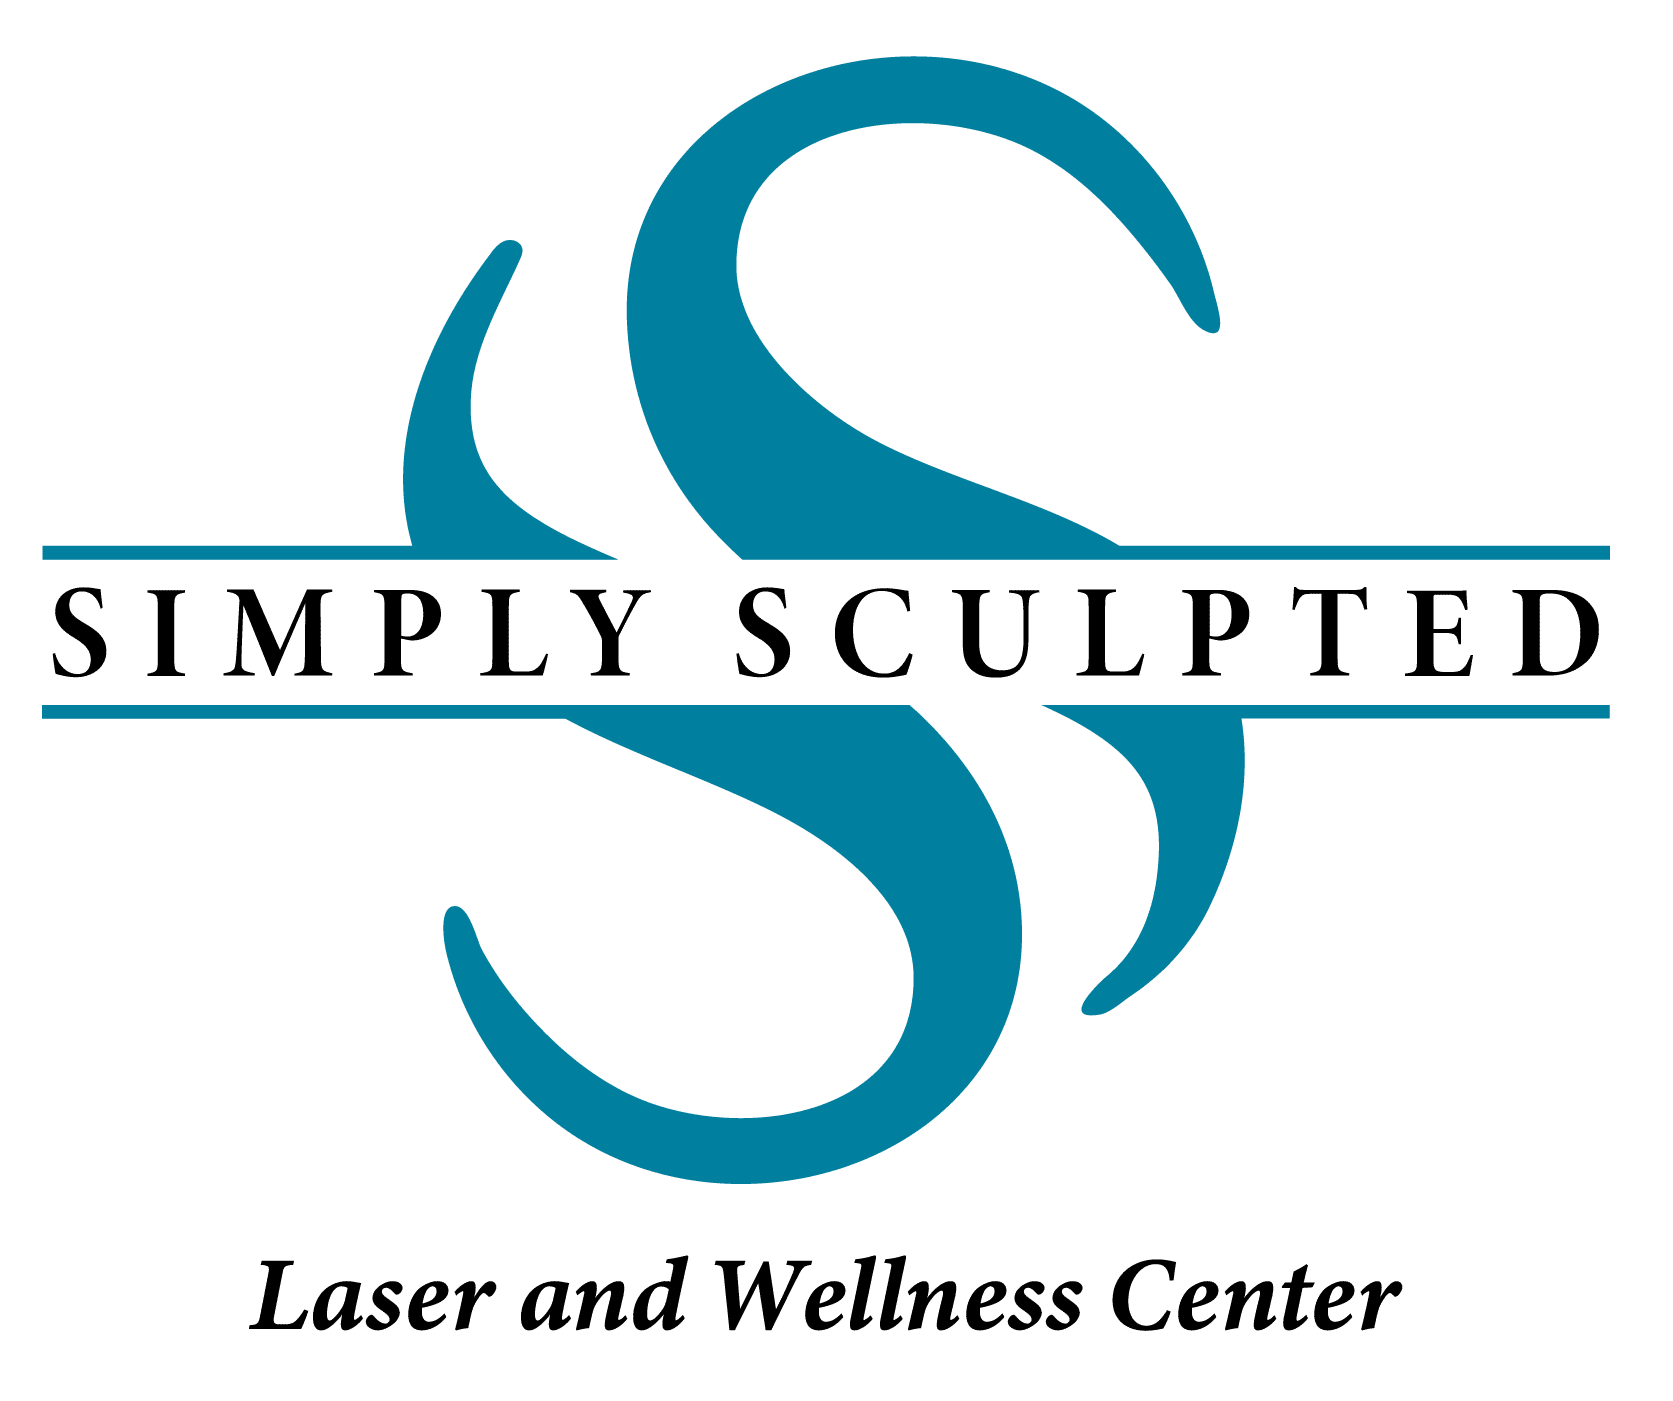 Simply Sculpted: Laser and Wellness Center